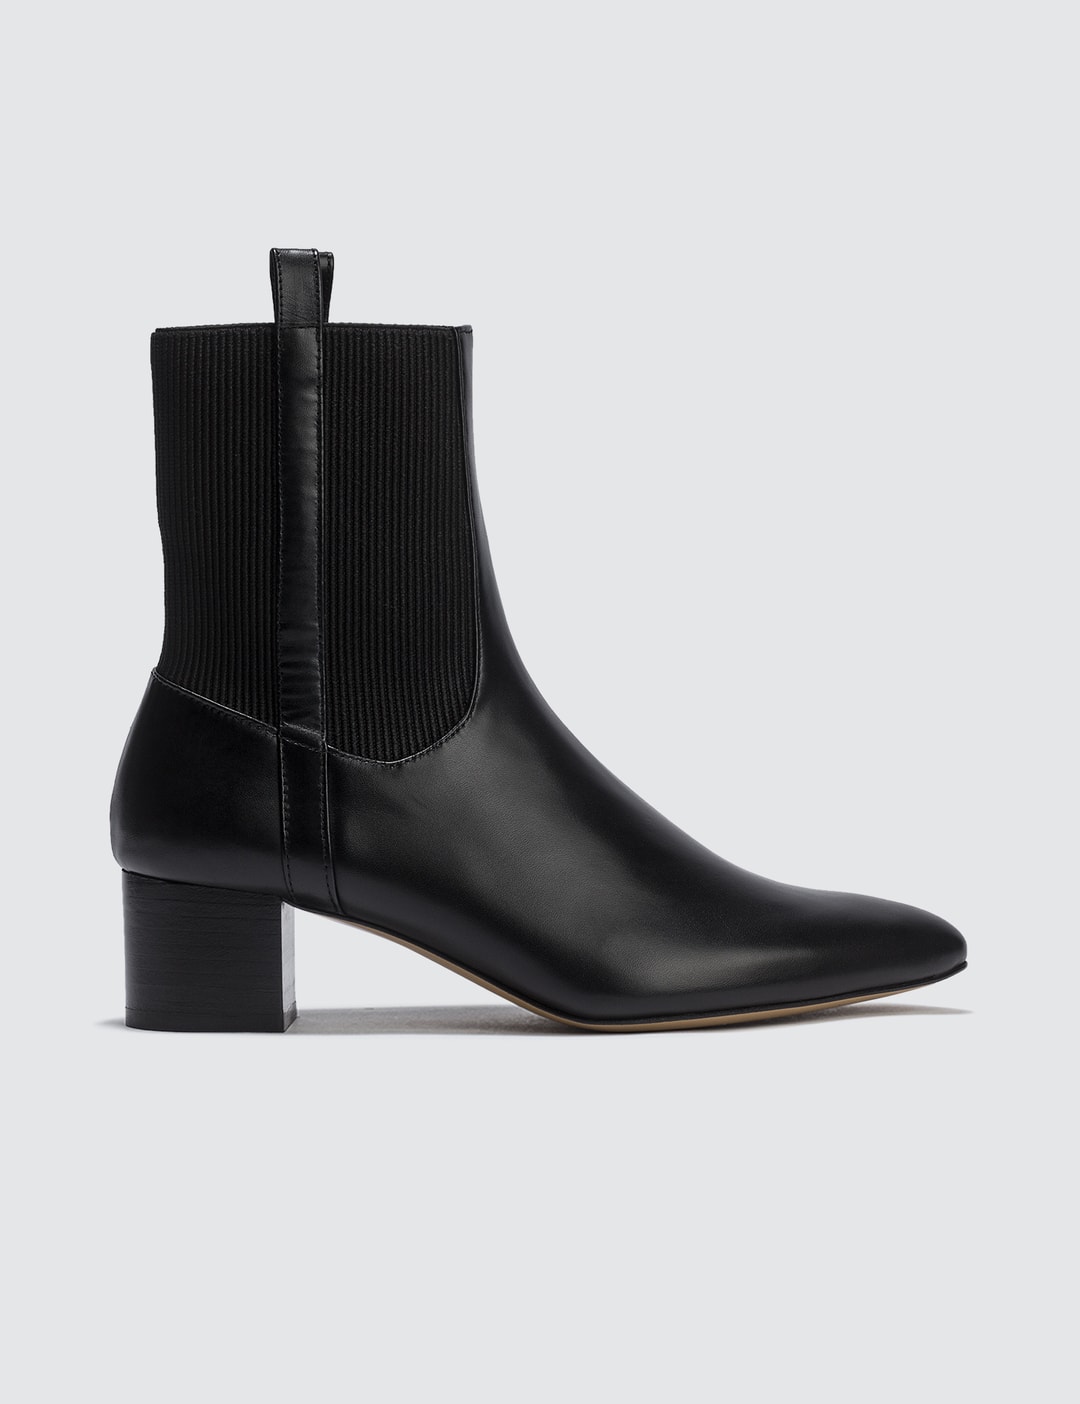 A.P.C. - Chantal Boots | HBX - Globally Curated Fashion and Lifestyle ...